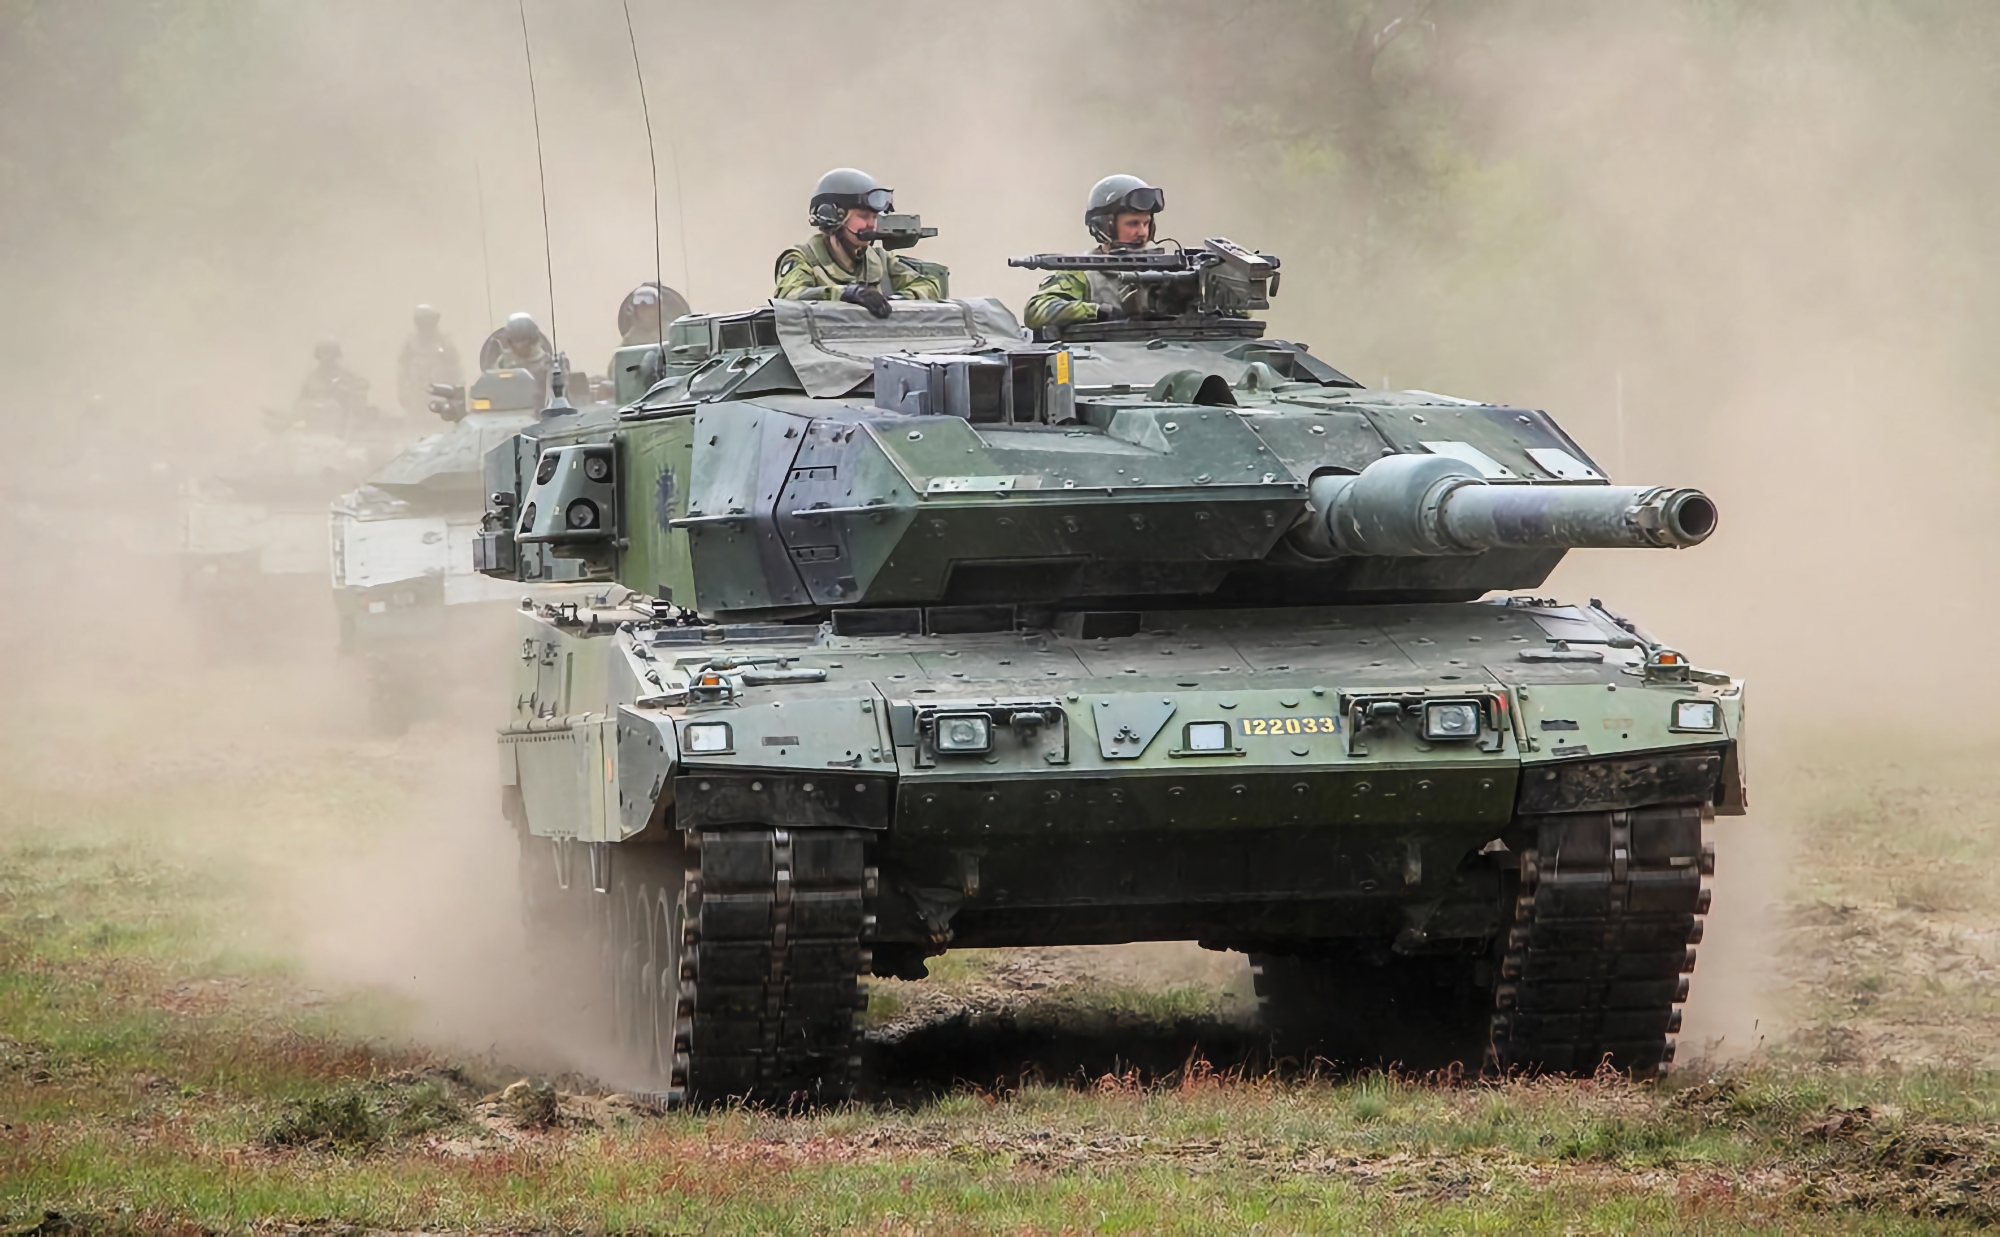 Ukrainian Armed Forces trained in Sweden on Stridsvagn 122 tanks, CV90 infantry fighting vehicles and Archer artillery